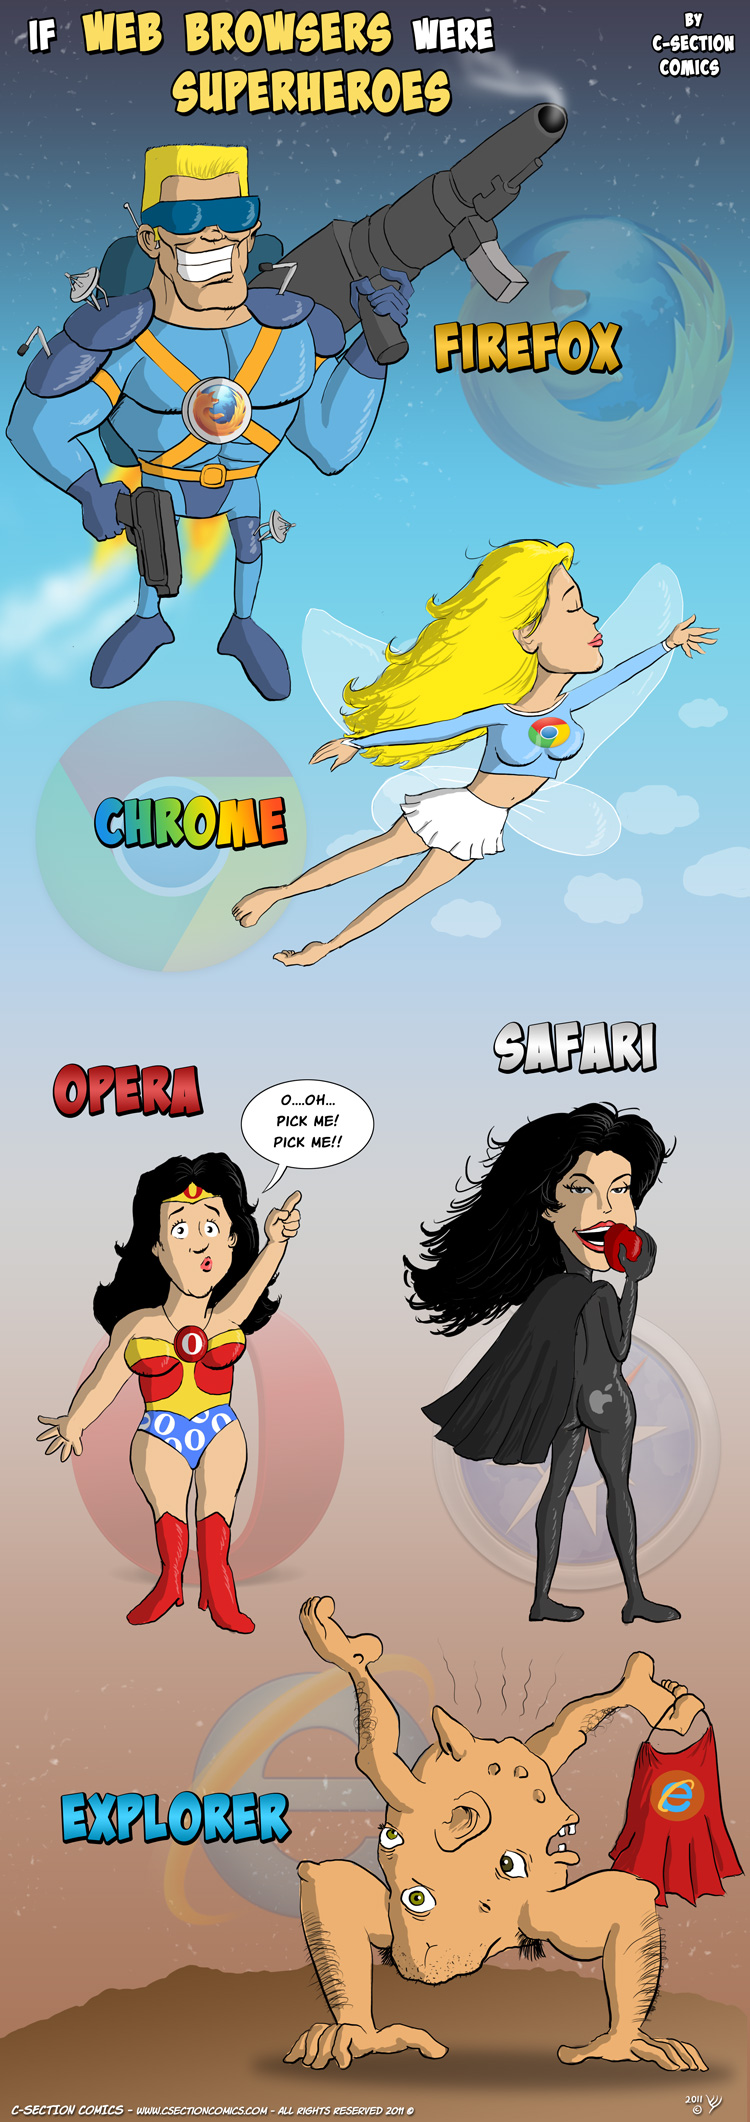 If Web Browsers Were Superheroes